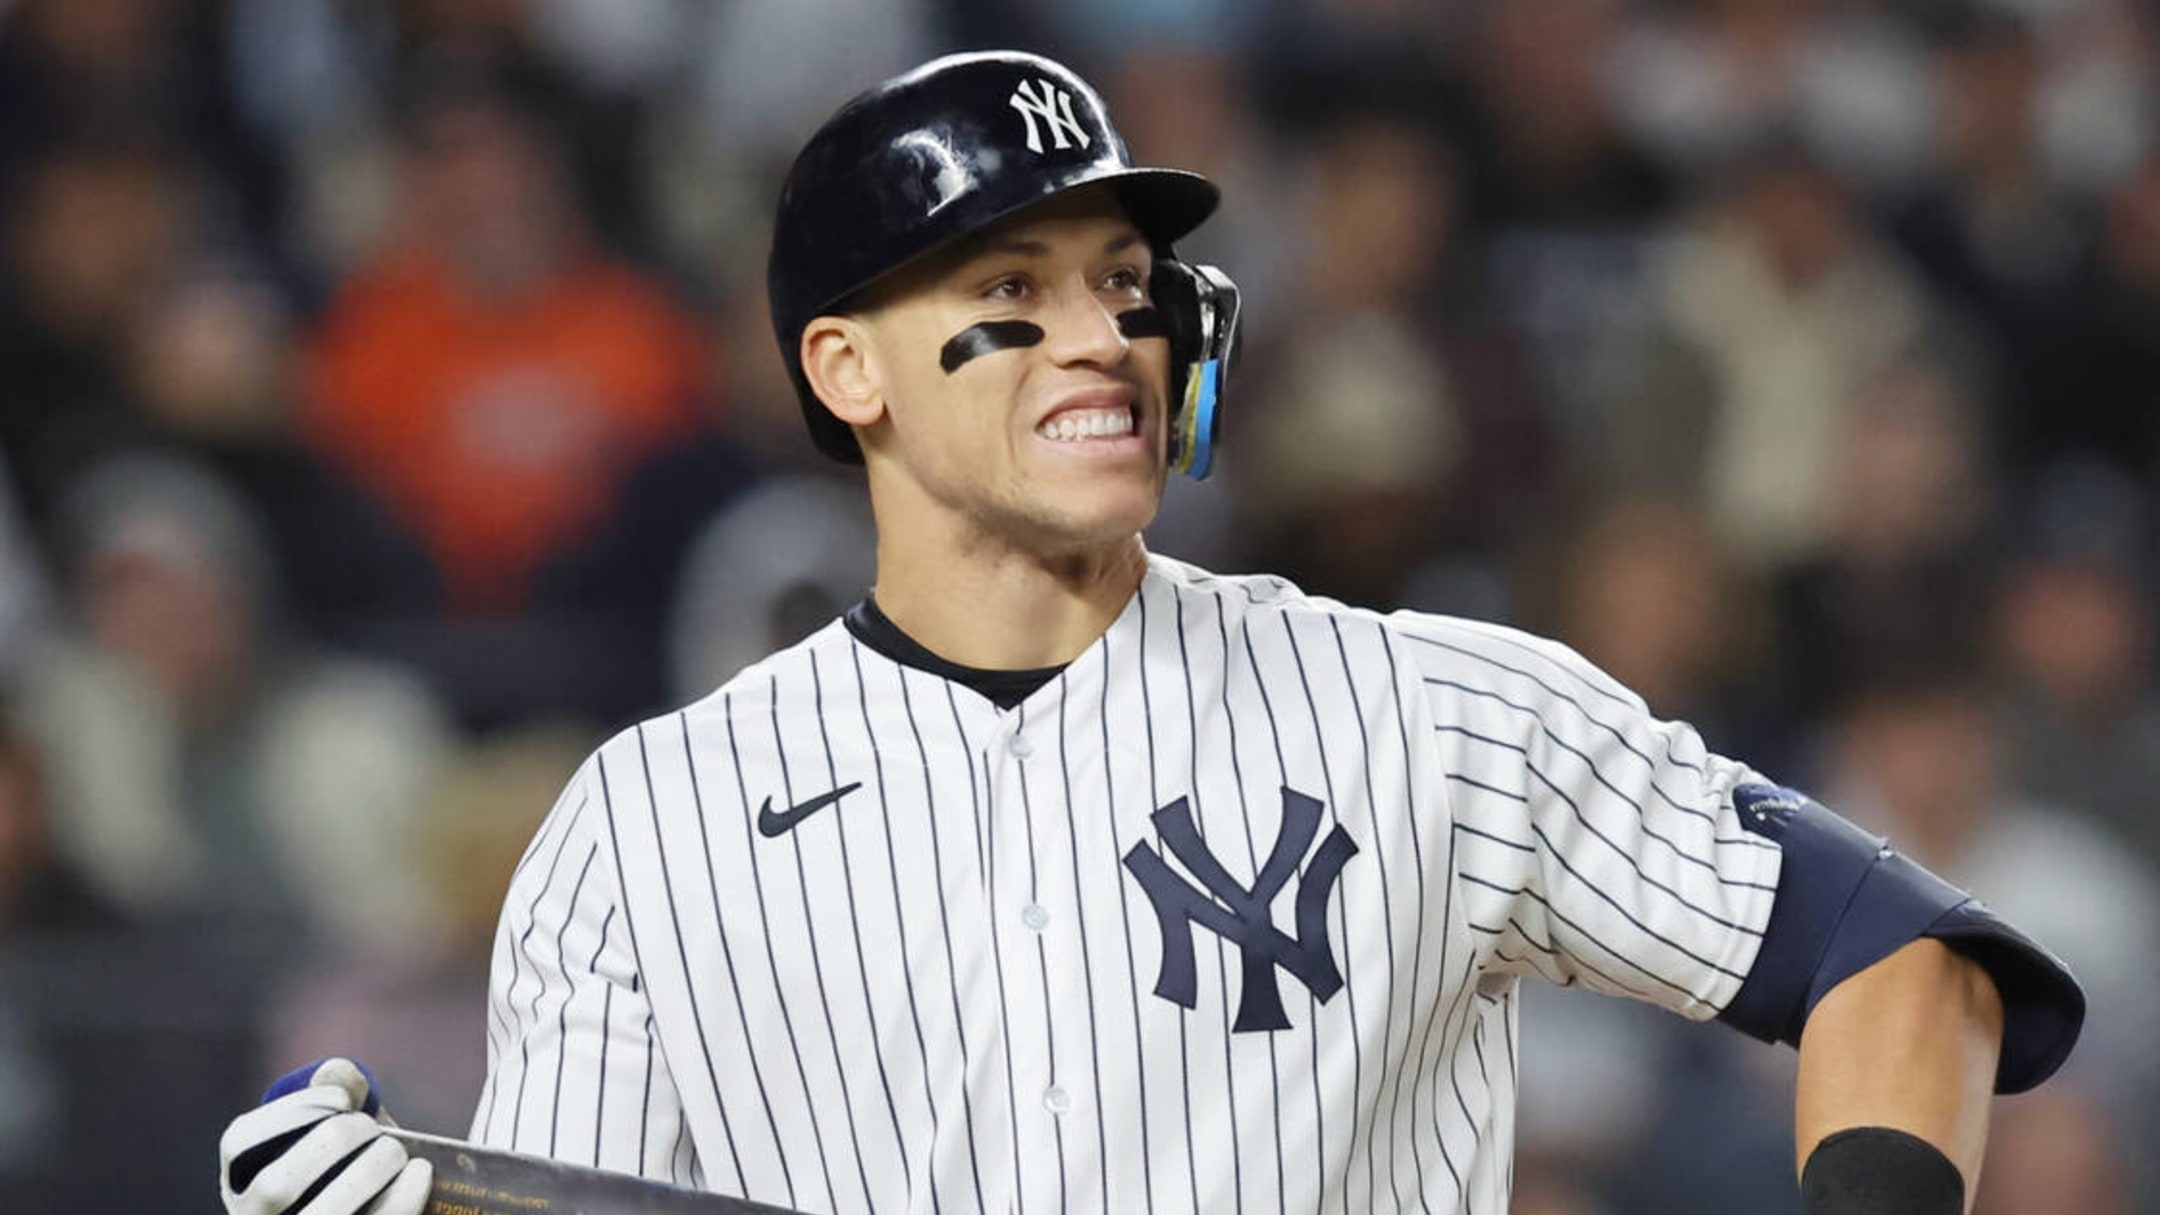 How likely is Aaron Judge to get a better deal than what the